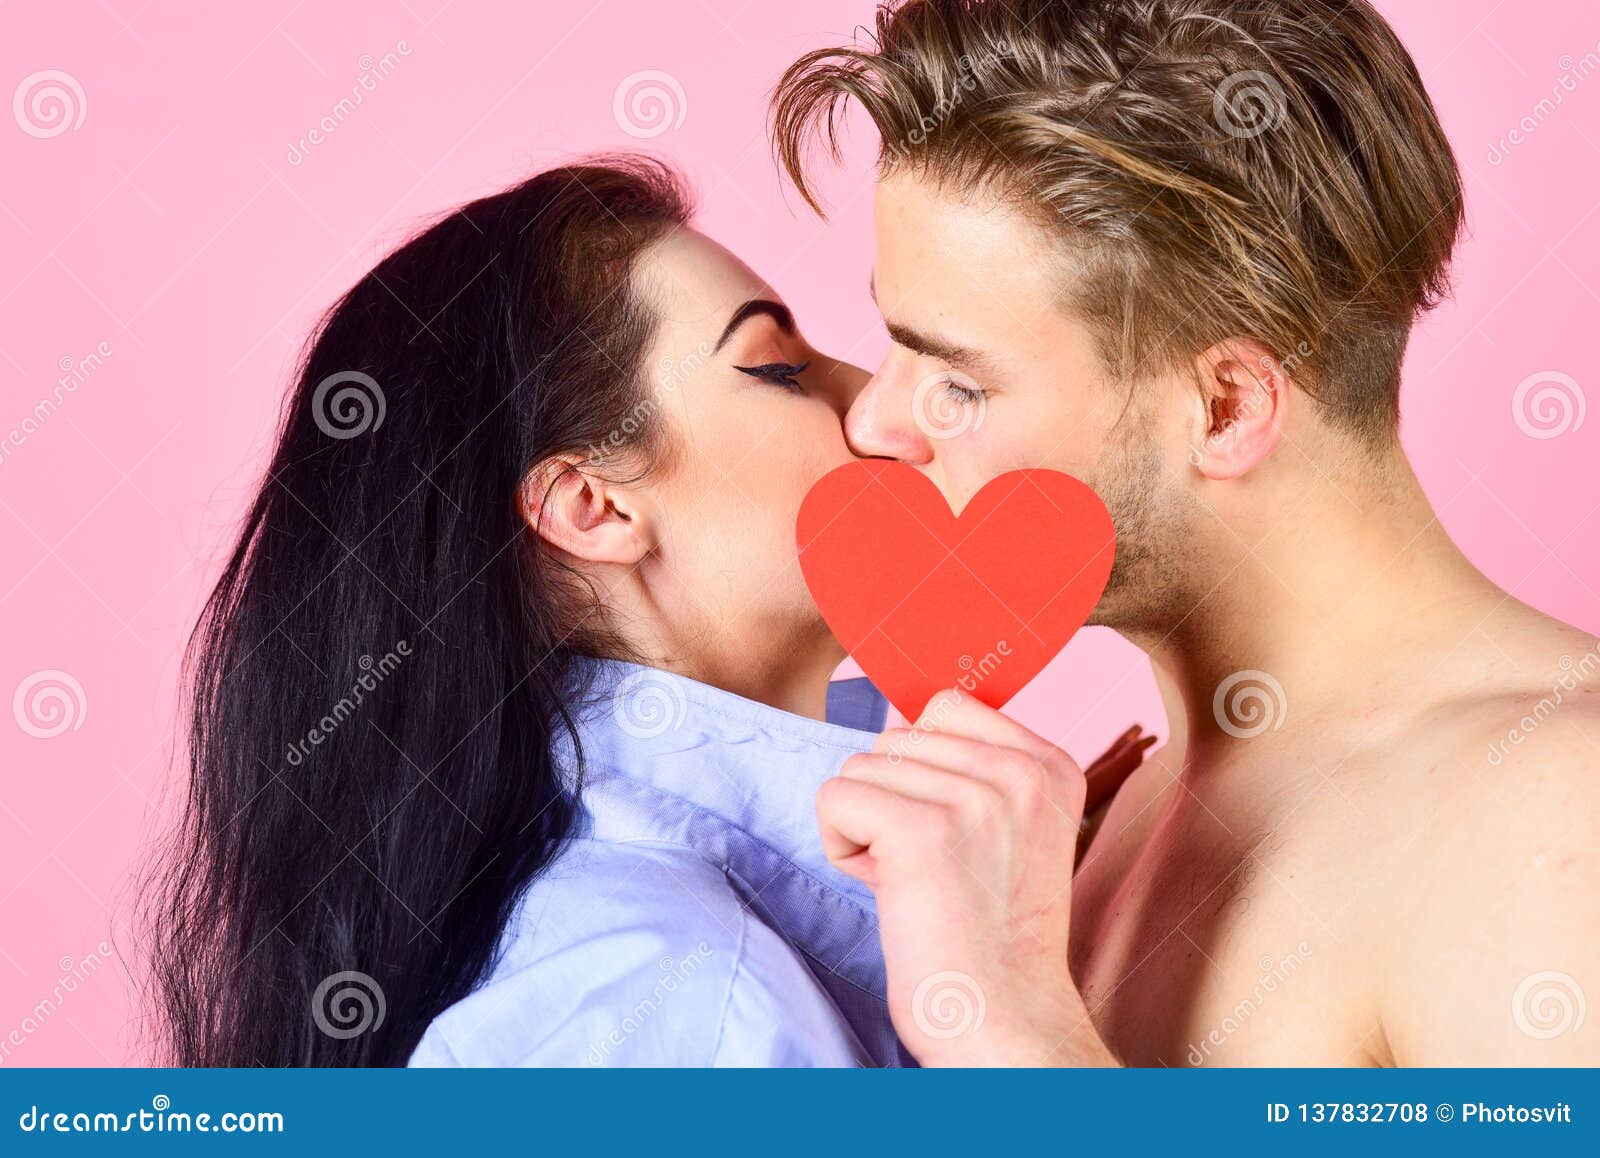 Love and Foreplay. Celebrate Valentines Day. Romantic Kiss Concept ...